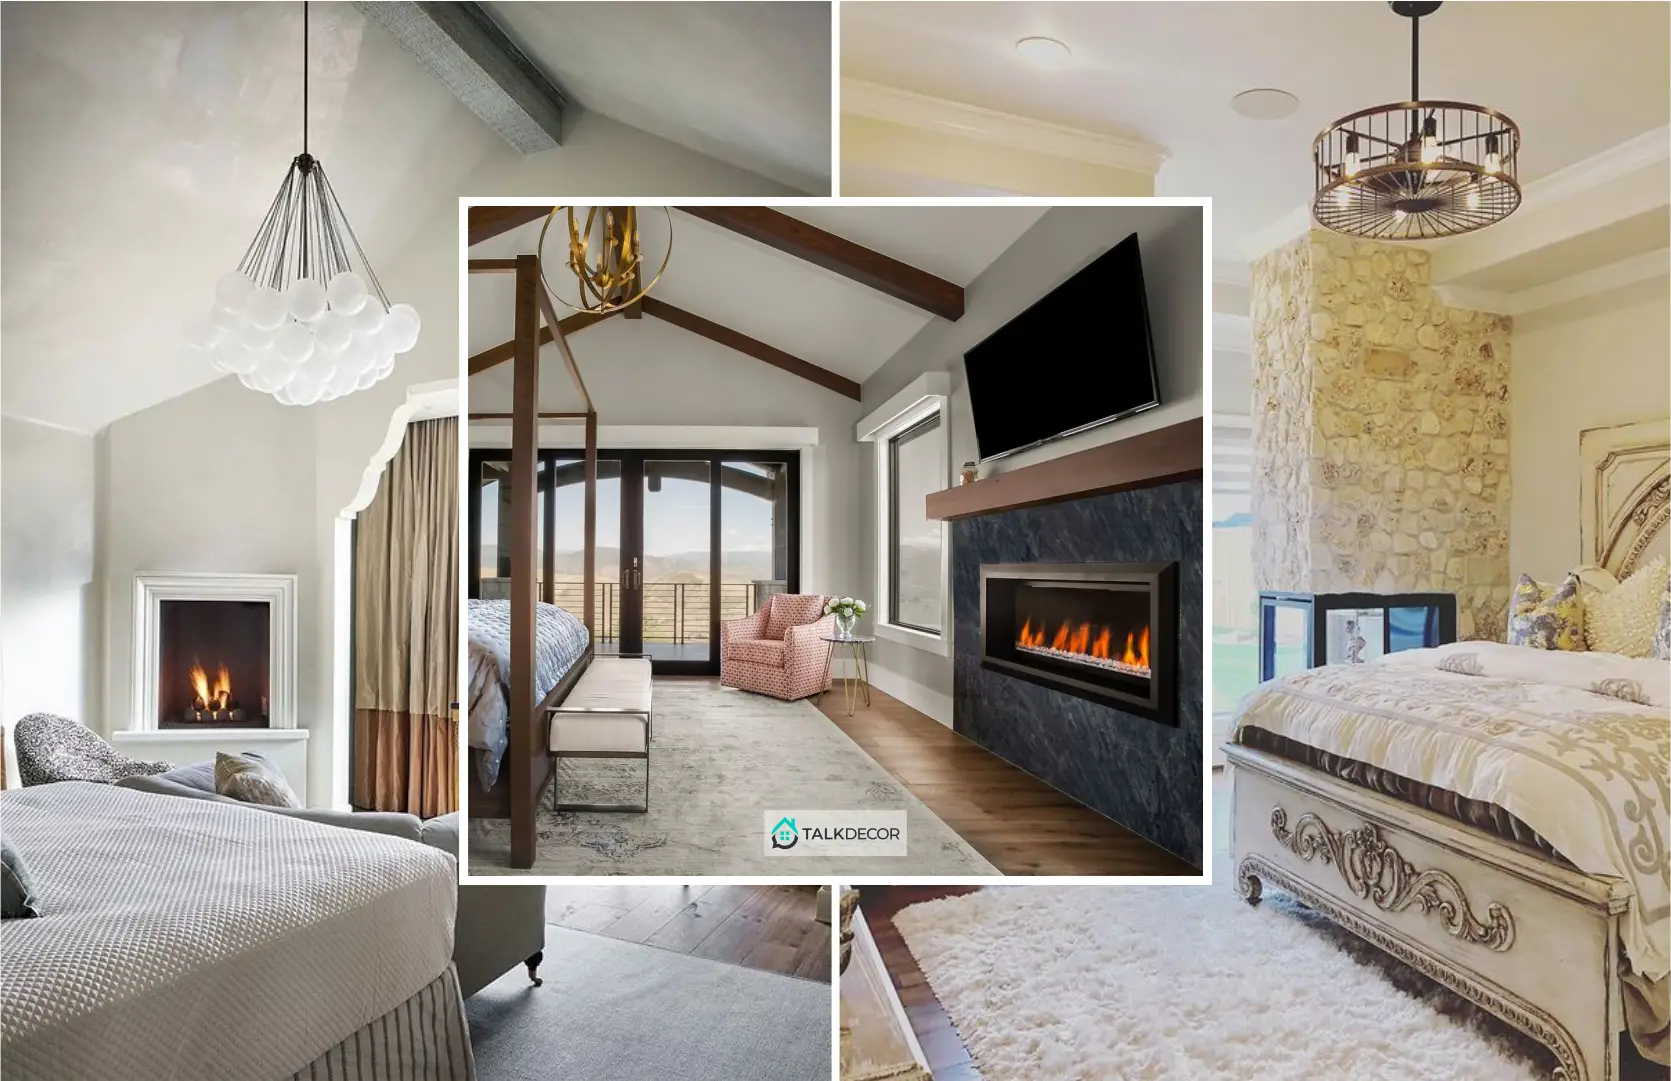 30 Highly Evolved Bedroom Designs With Fireplace To Stay All Day And Night